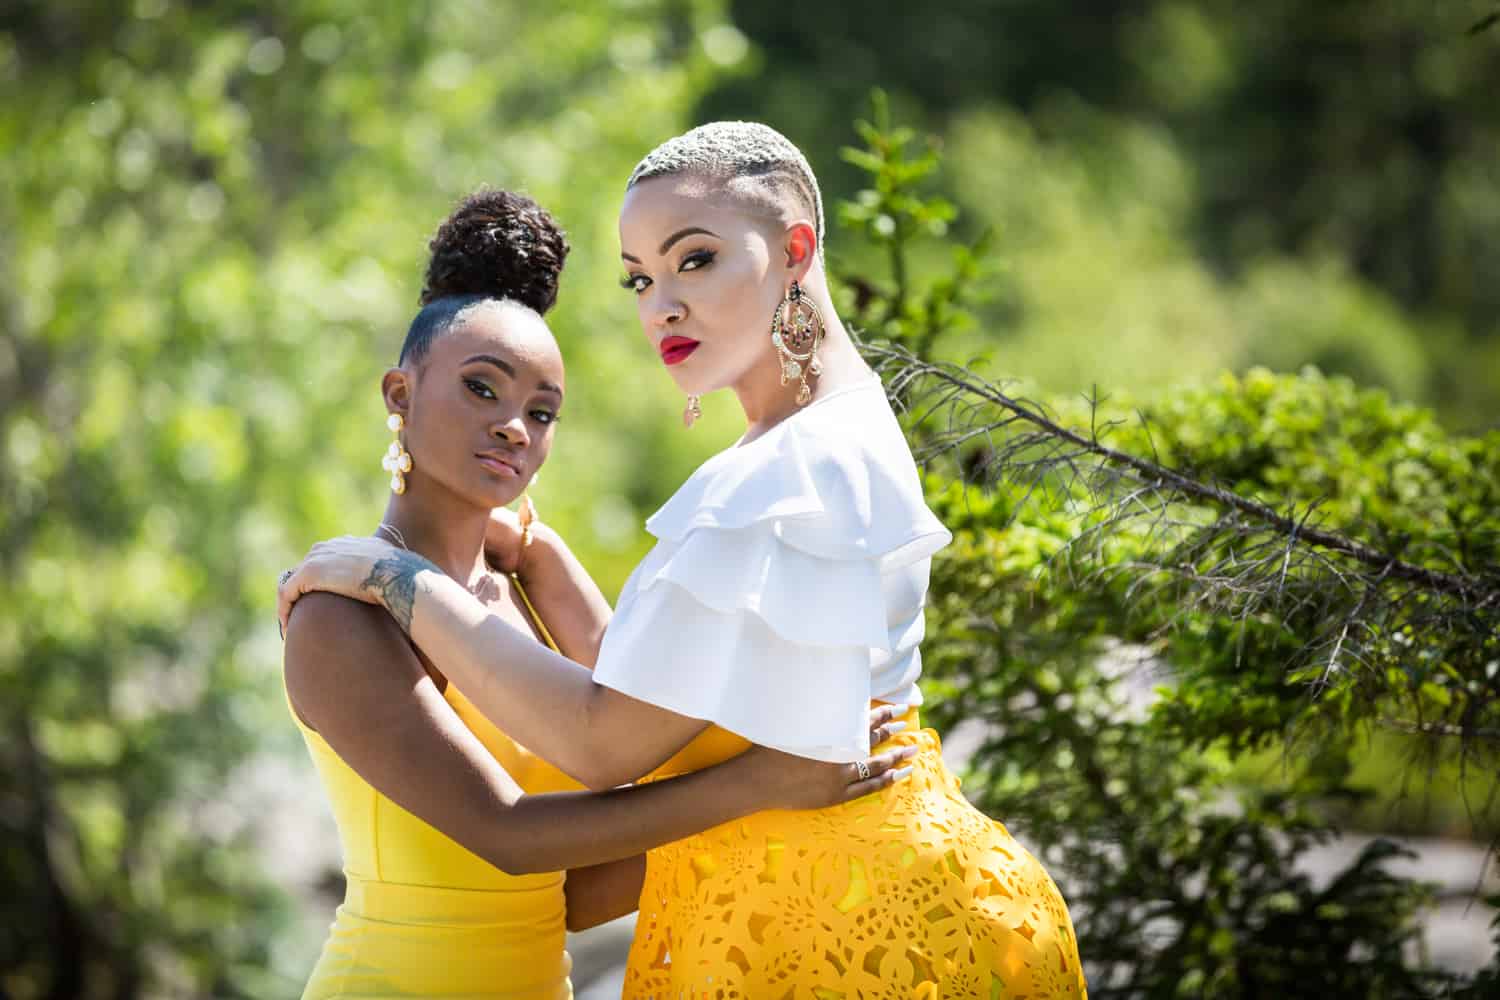 Mother and daughter wearing yellow outfits during a family reunion portrait